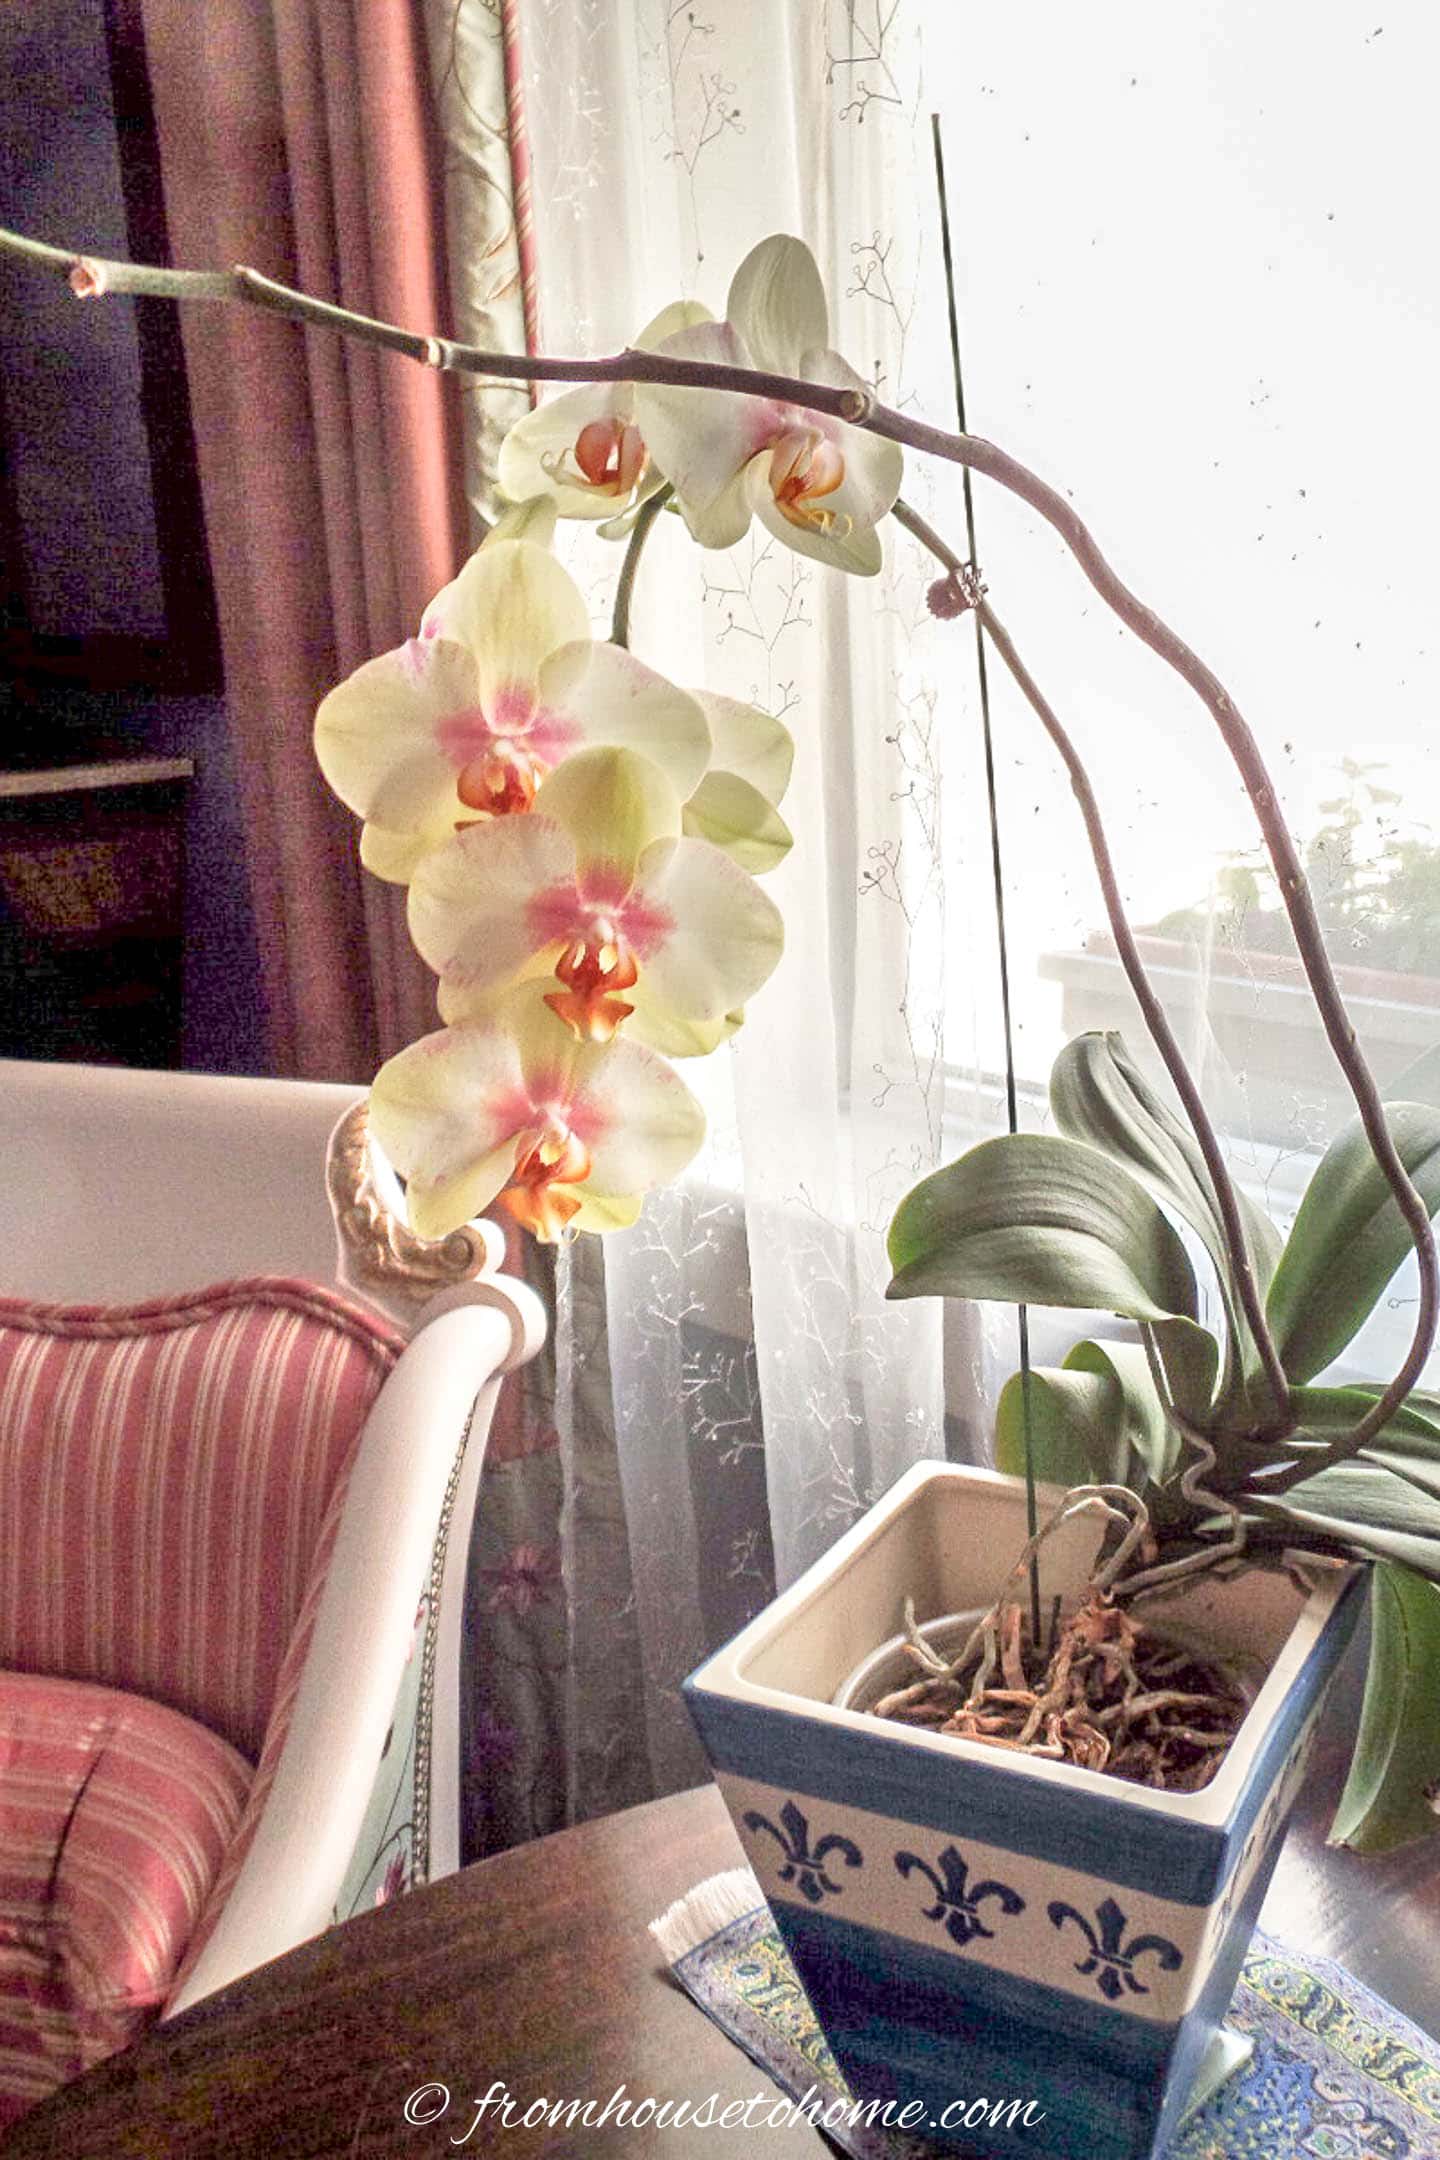 Moth or Phalaenopsis orchid with a second stem about to bloom